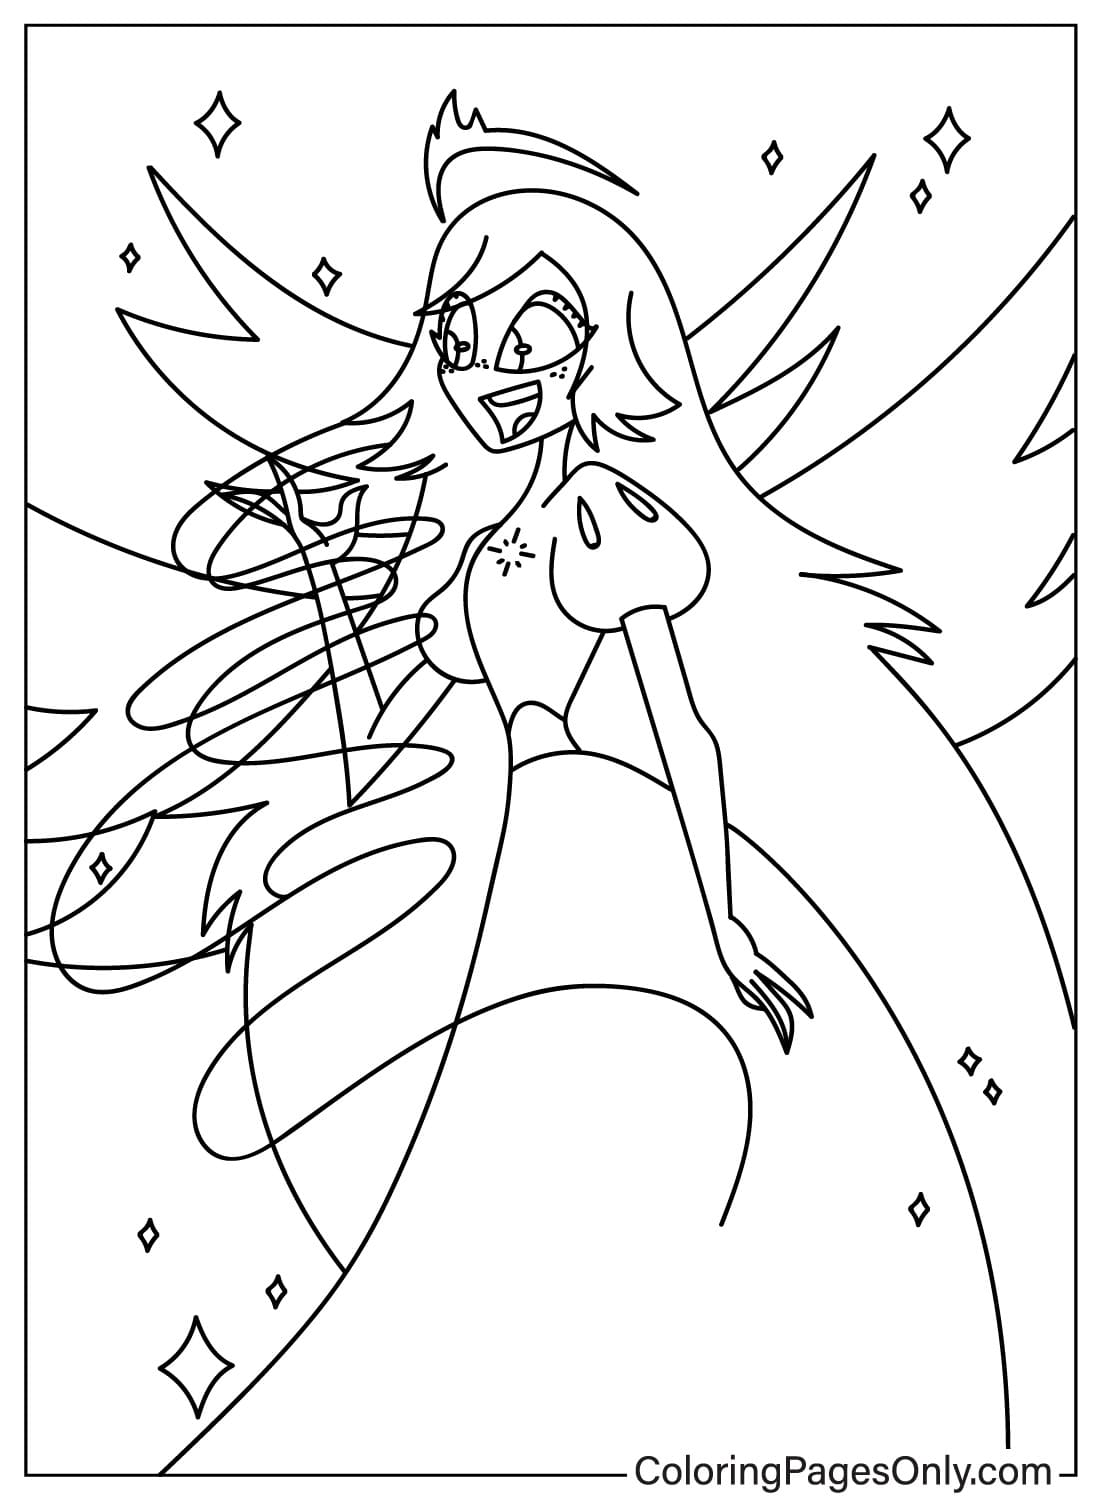 Emily Coloring Sheet from Emily